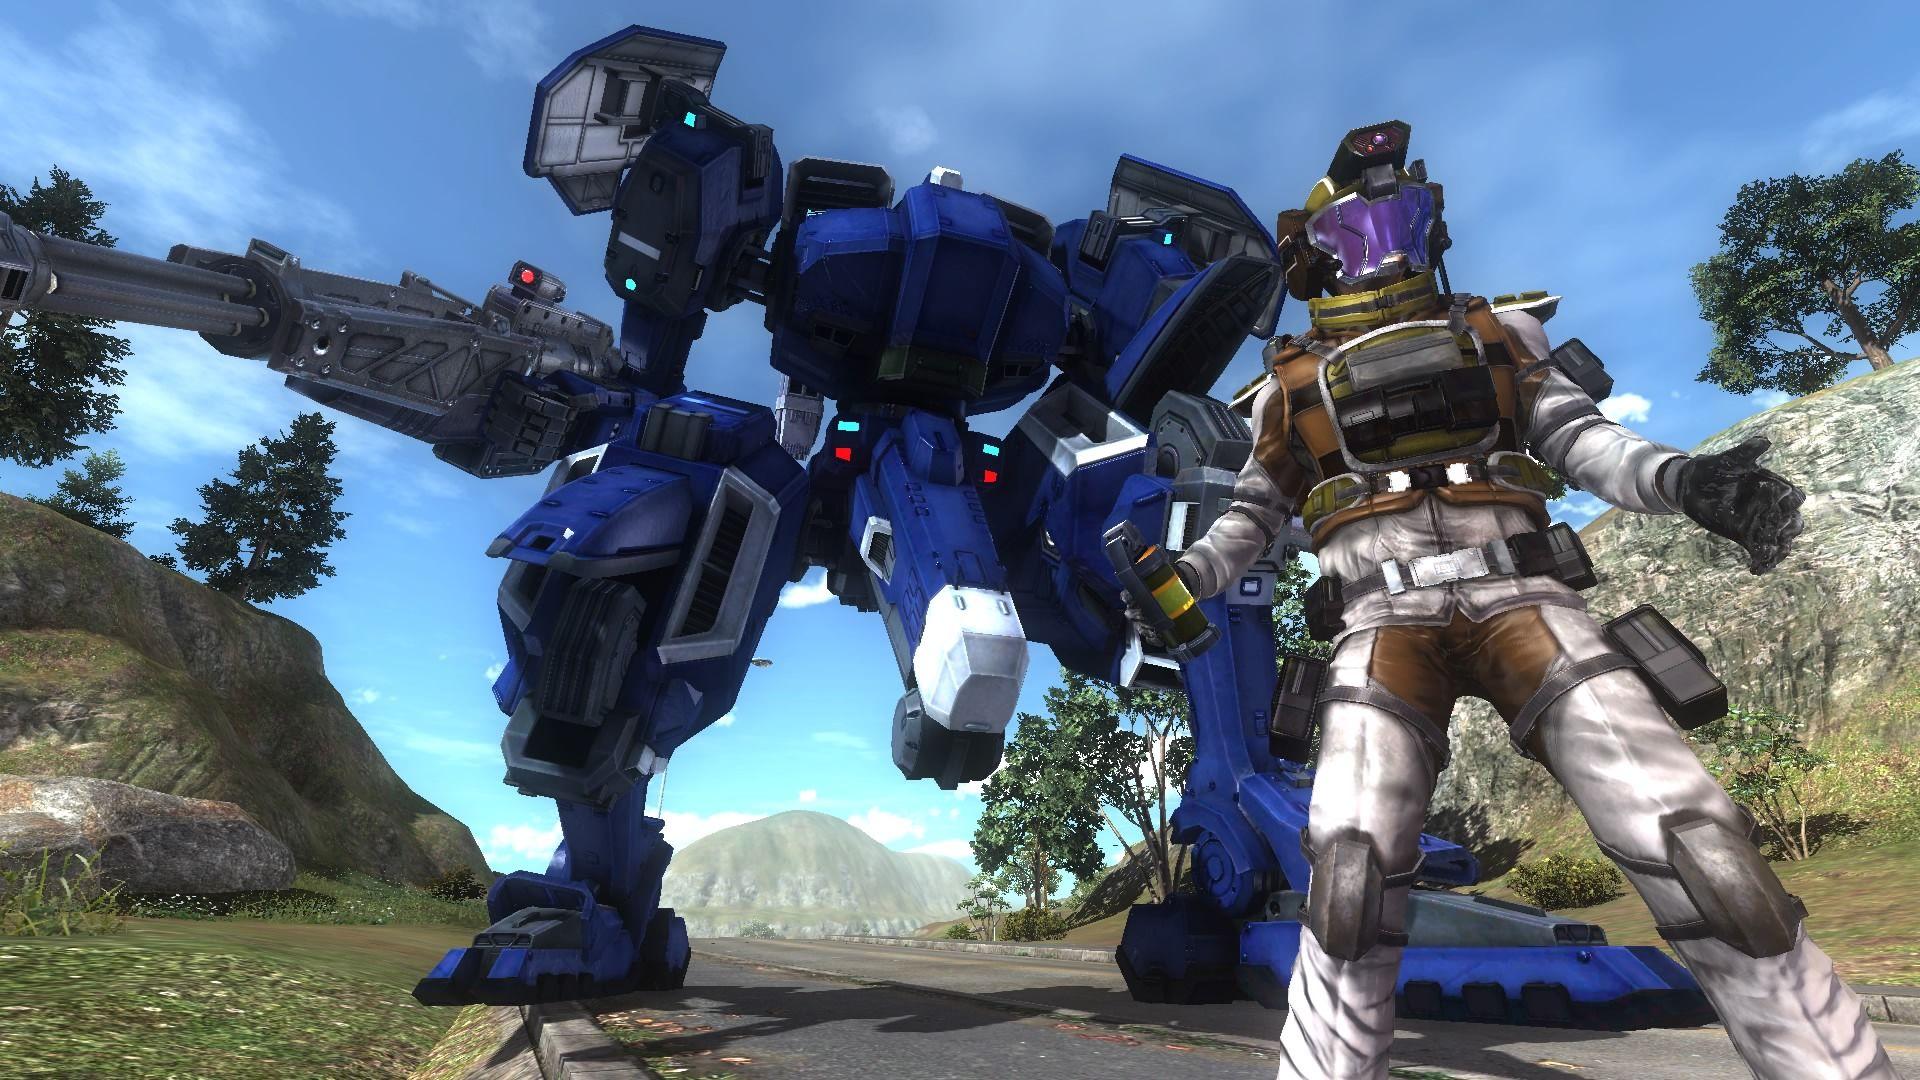 EARTH DEFENSE FORCE 5 OFFICIAL SITE